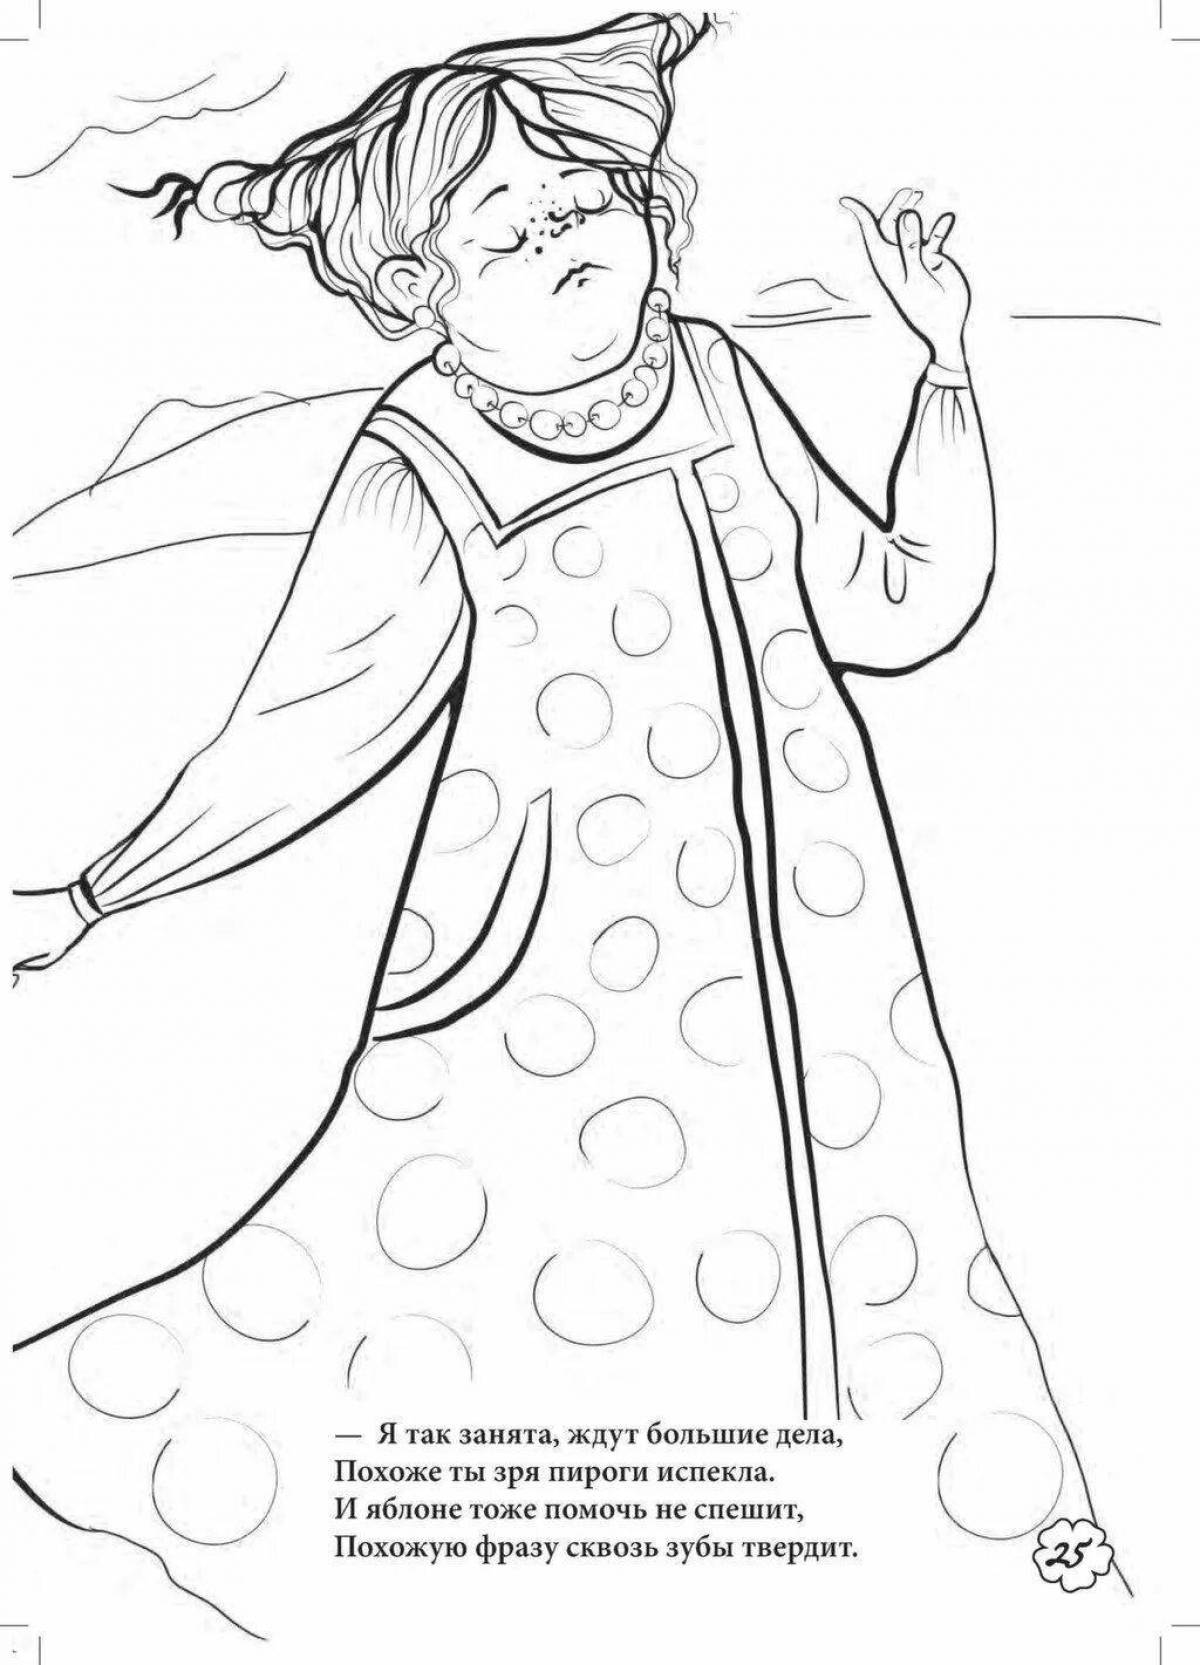 Flawless Lady Blizzard coloring page